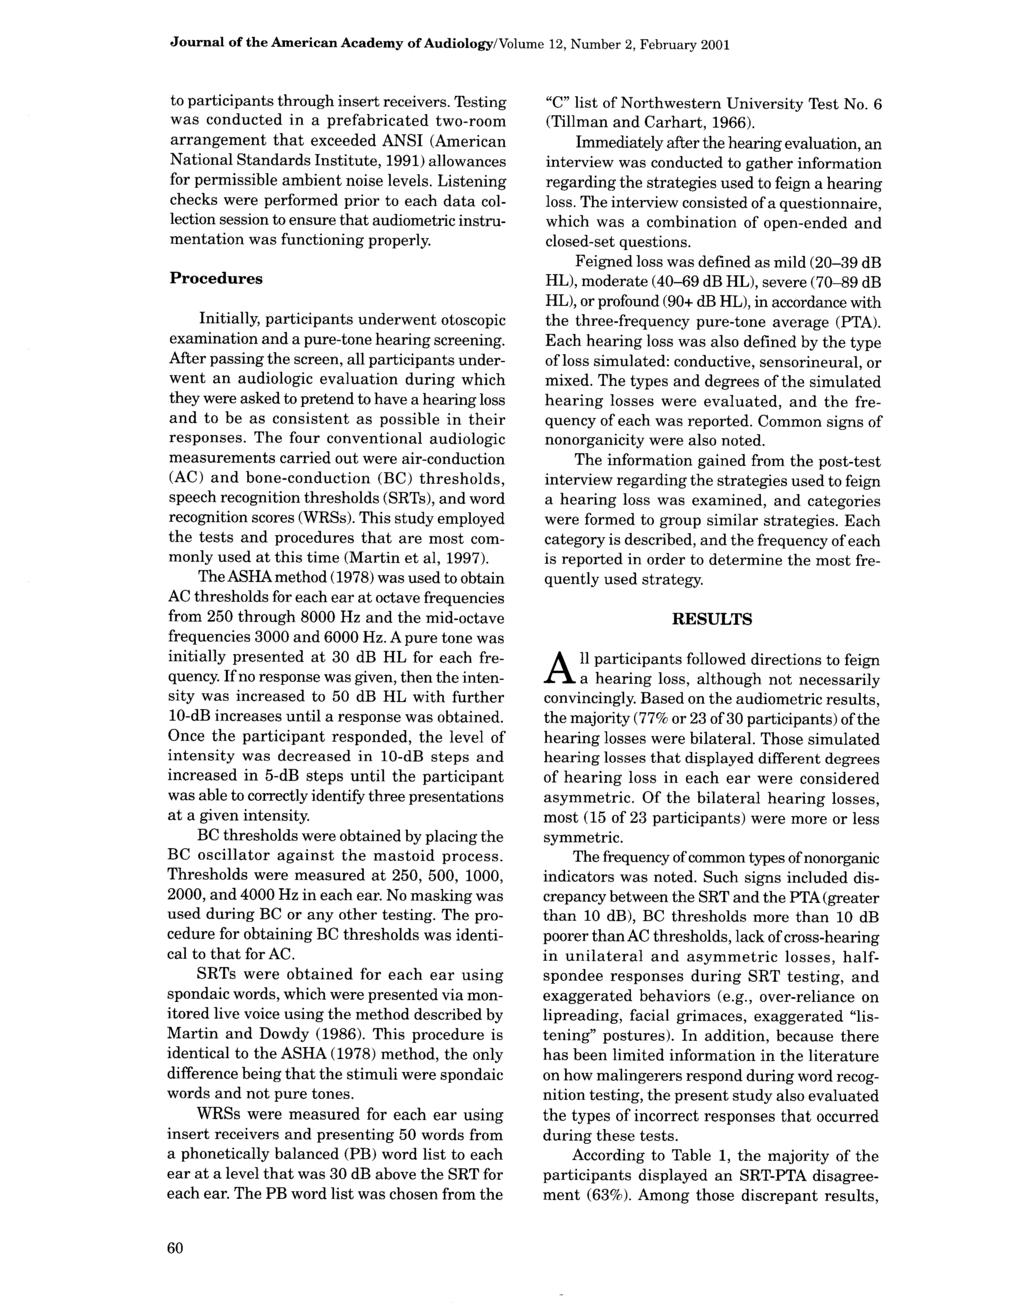 Journal of the American Academy of Audiology/Volume 12, Number 2, February 2001 to participants through insert receivers.